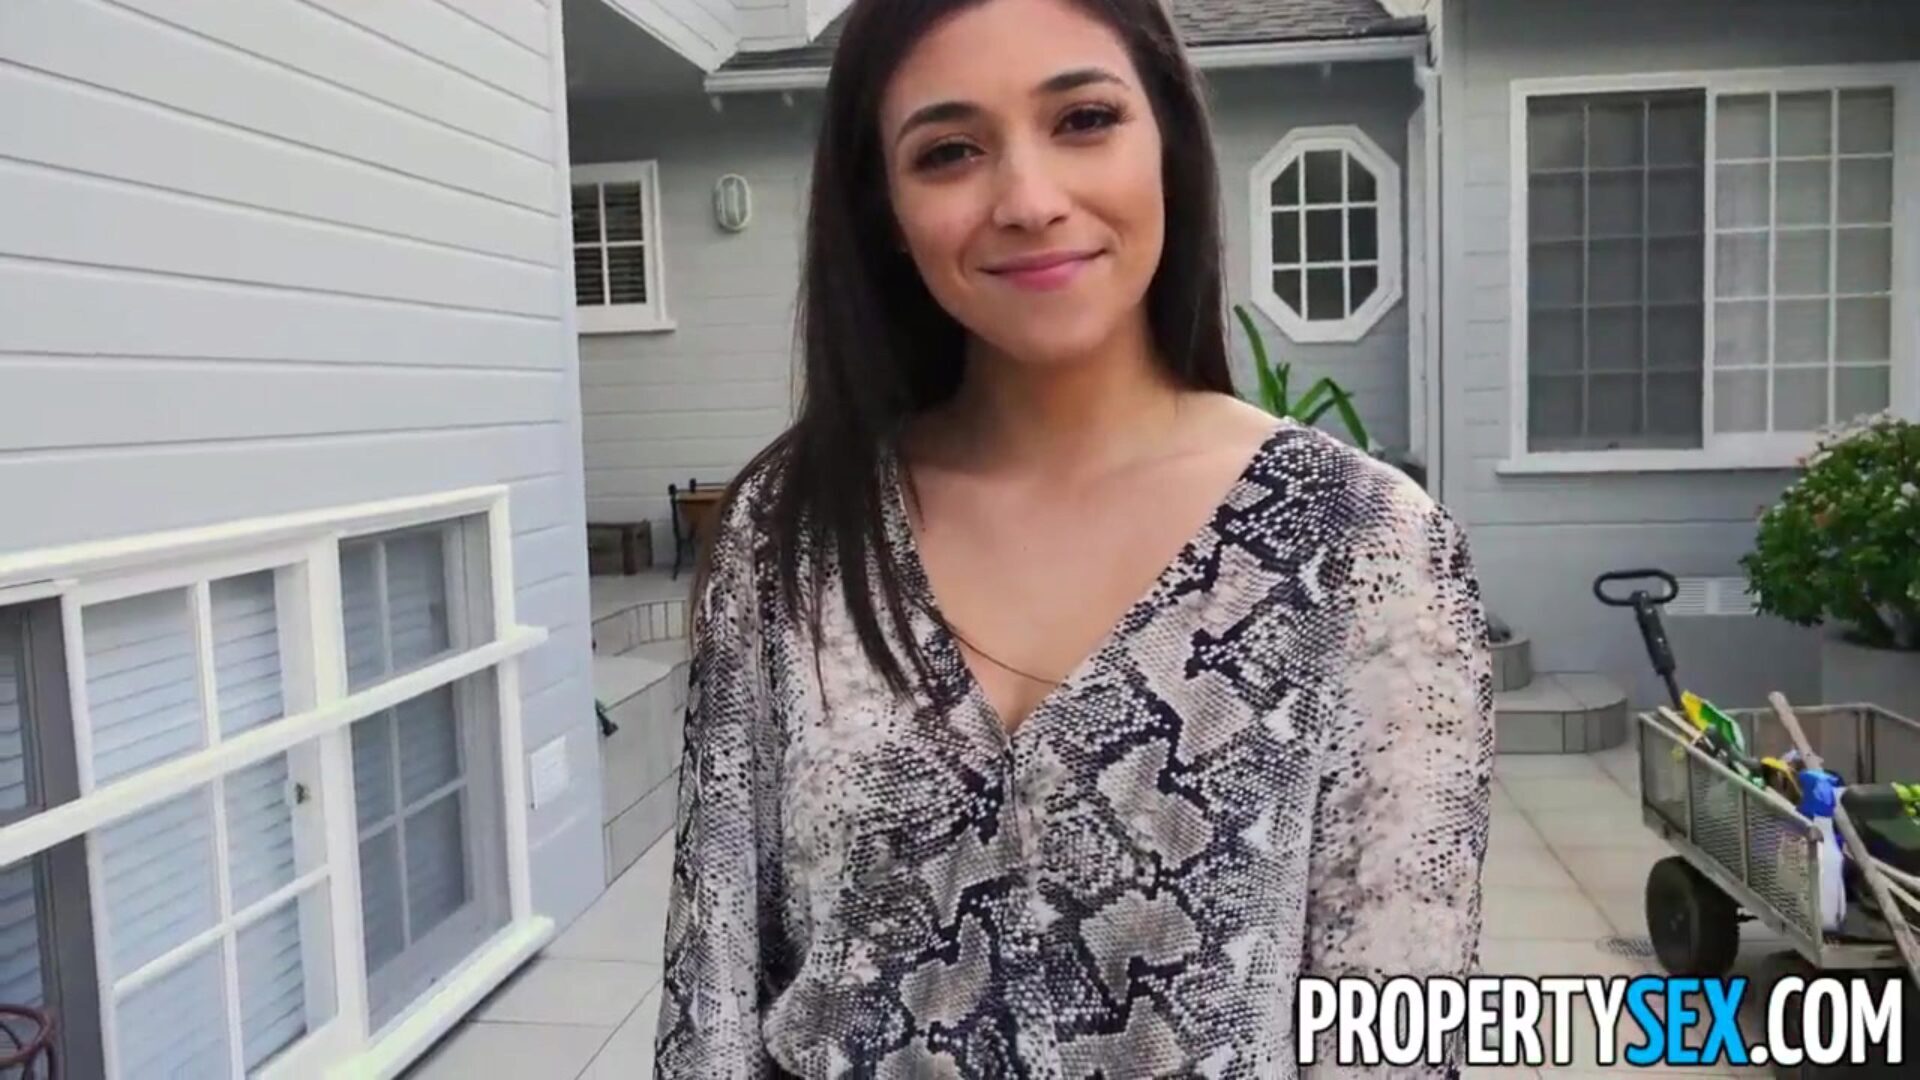 PropertySex I'm a Better Real Estate Agent Than Mom